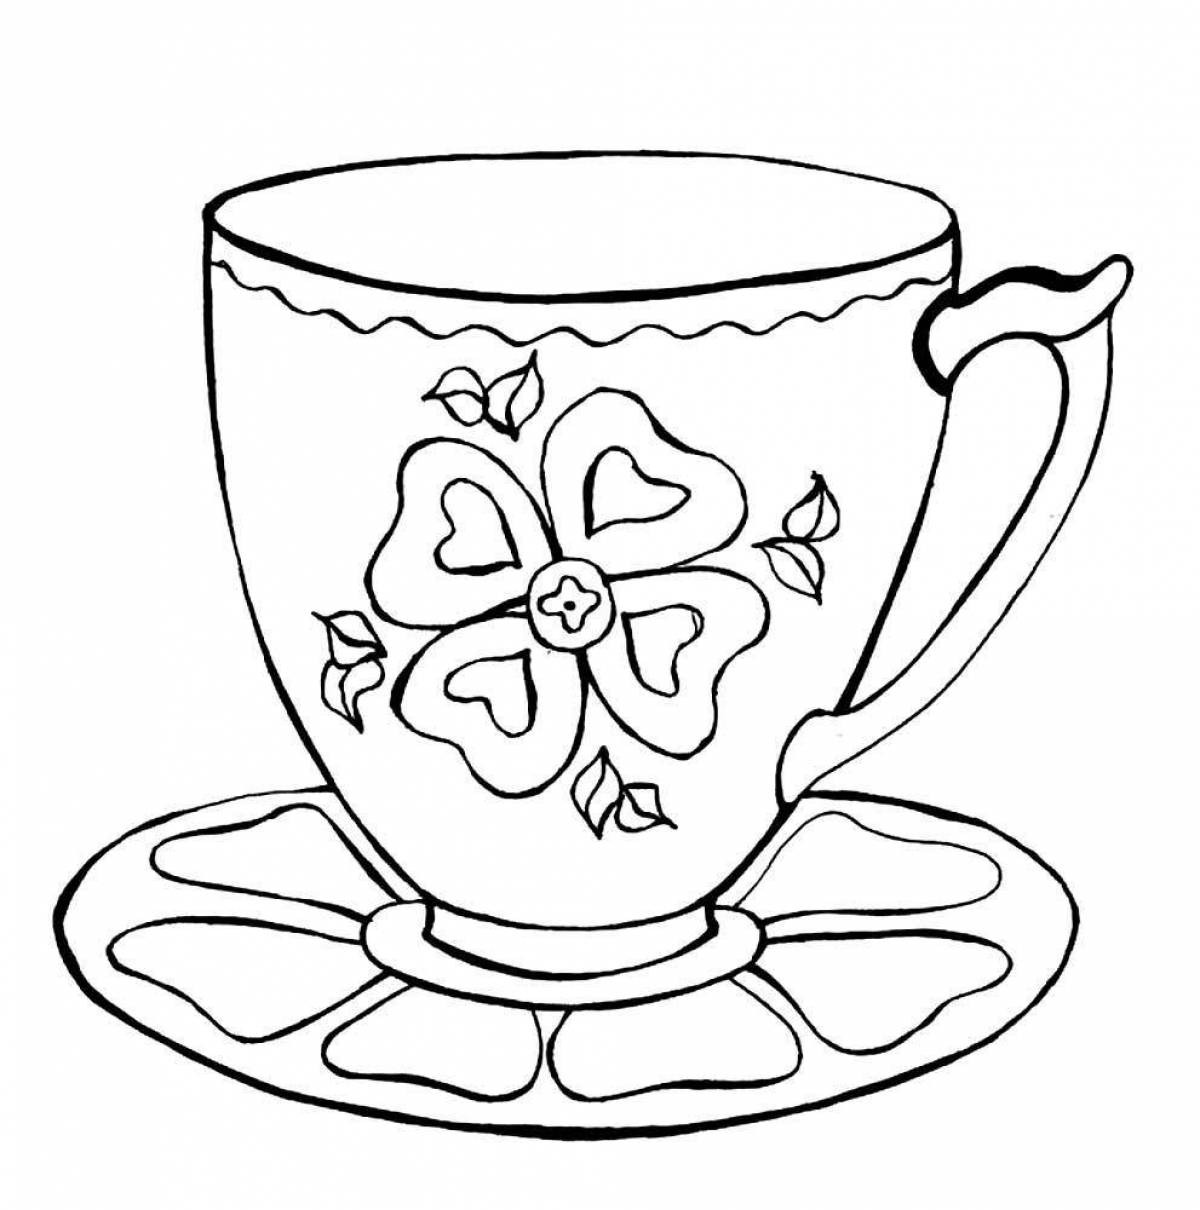 Blissful cup coloring book for kids